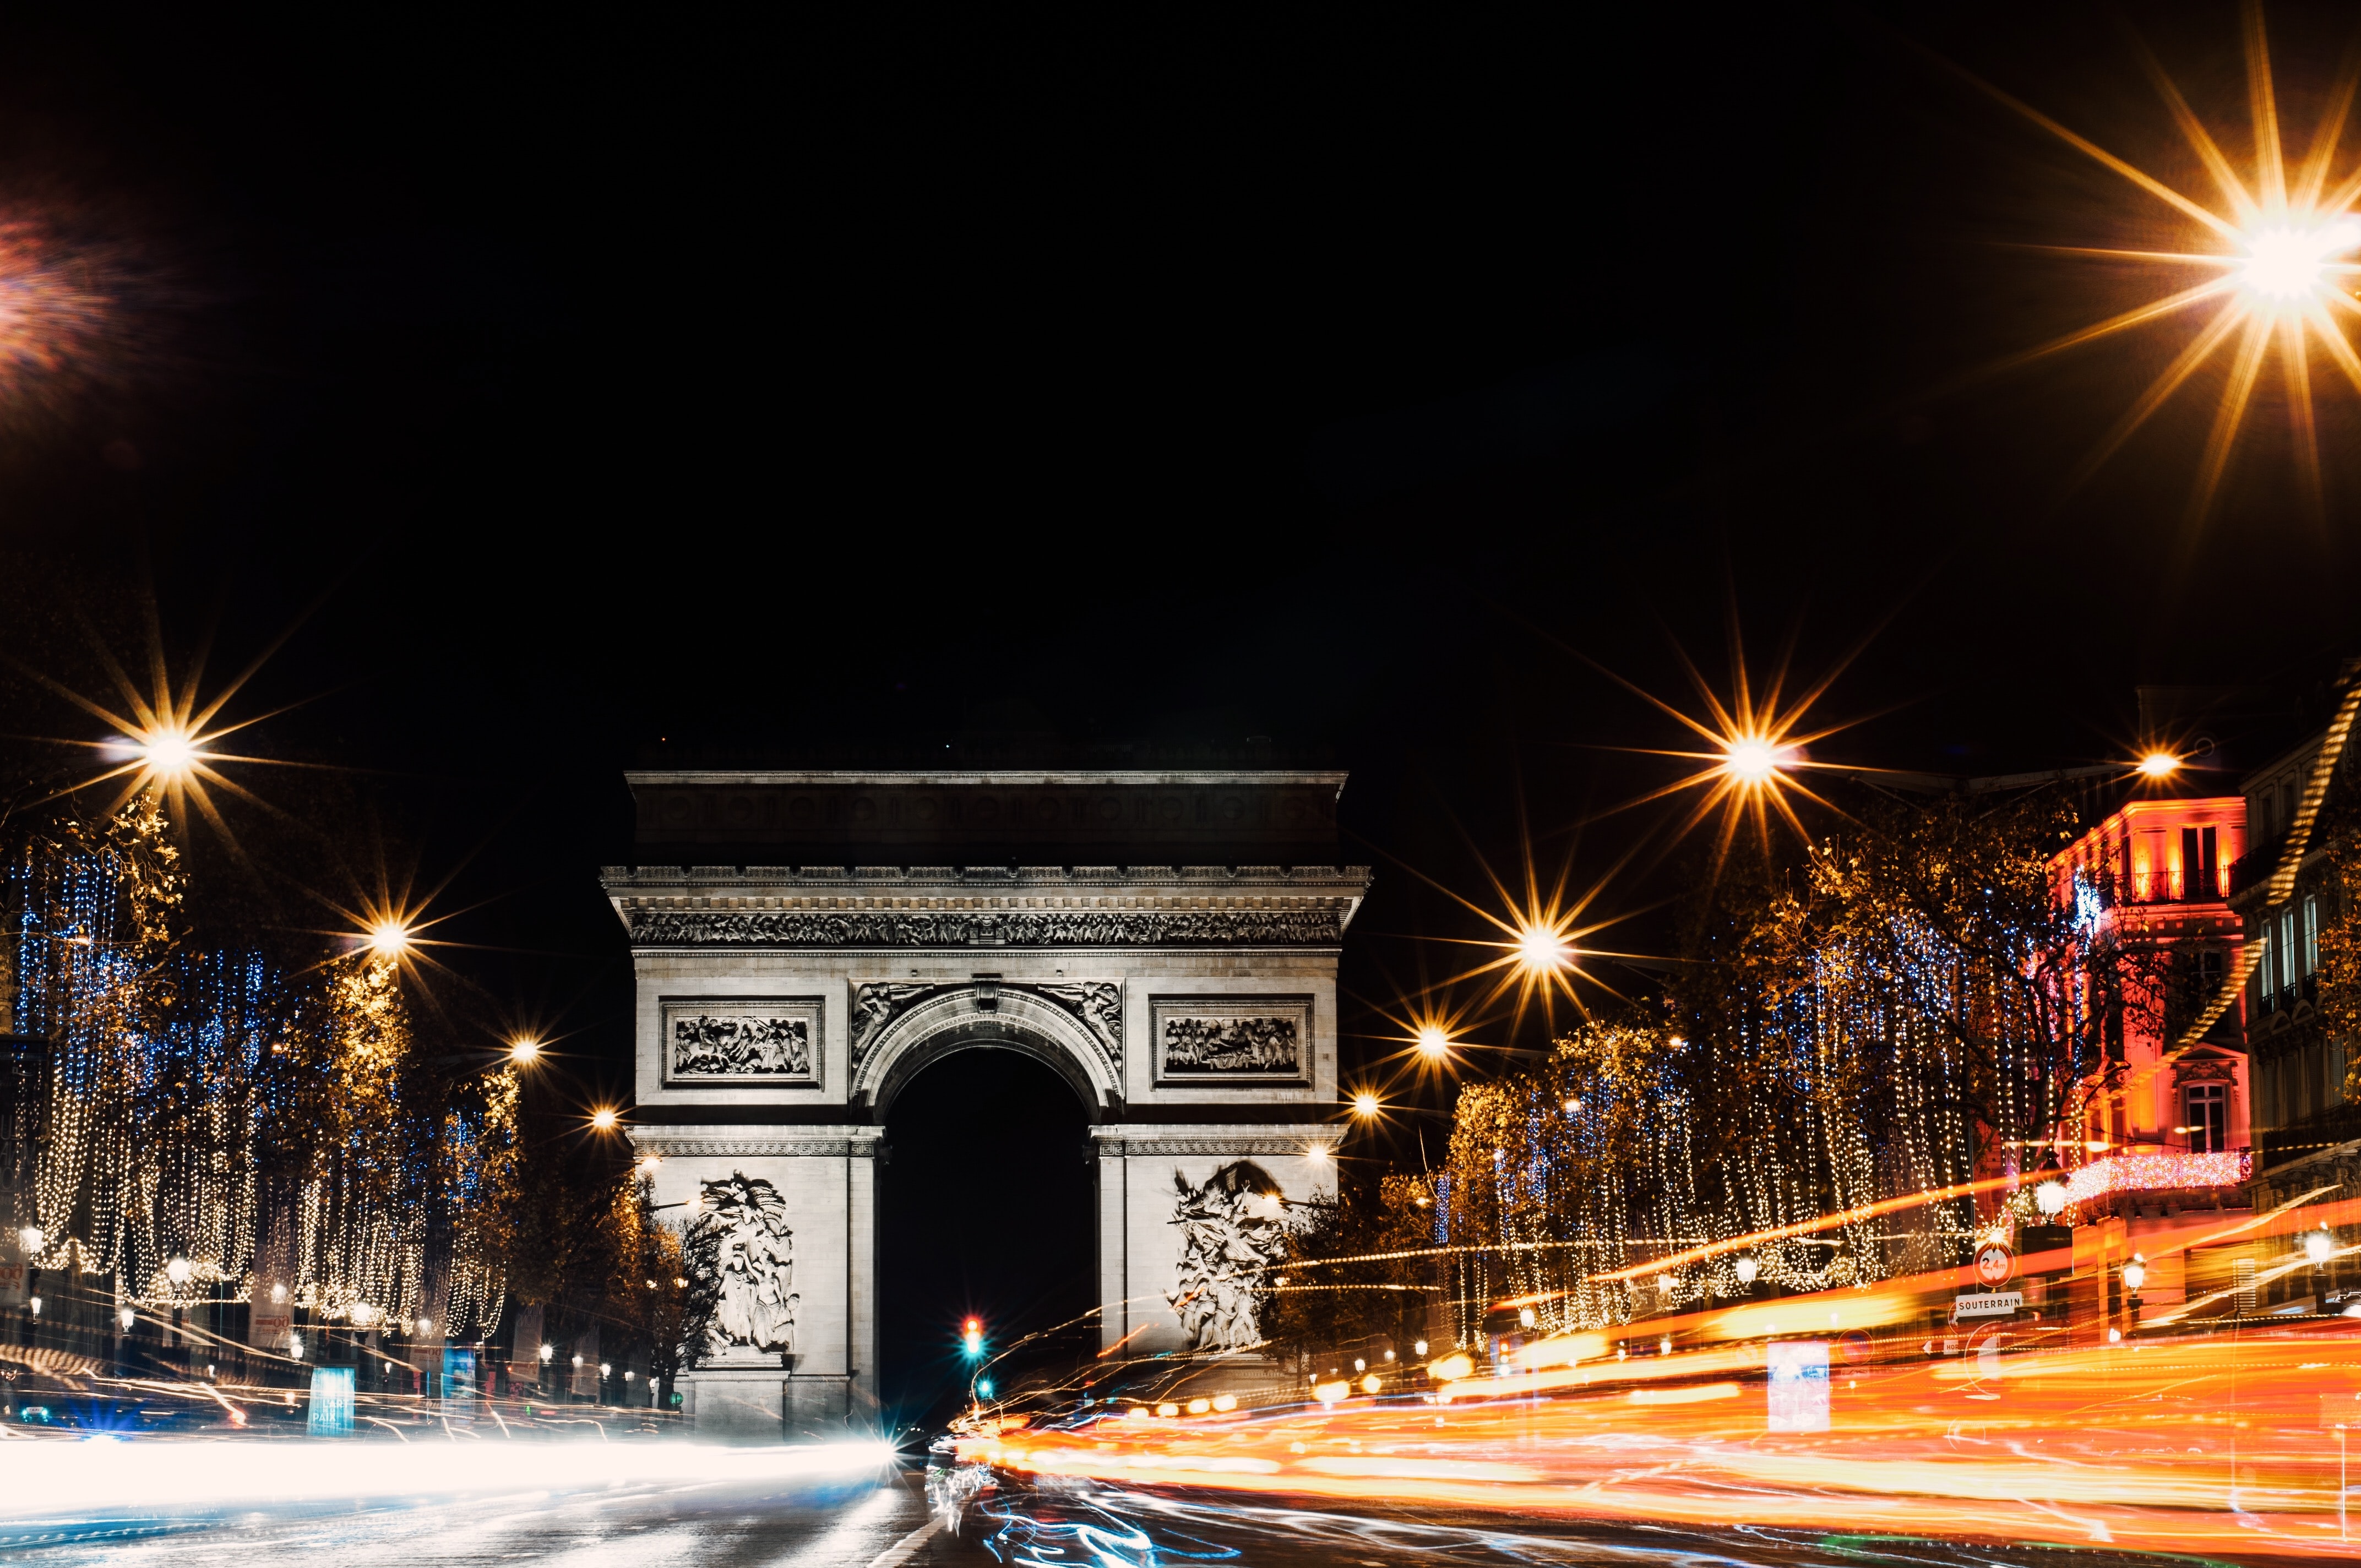 The Arc de Triomphe in Paris at night, one of the most beautiful cities in the world